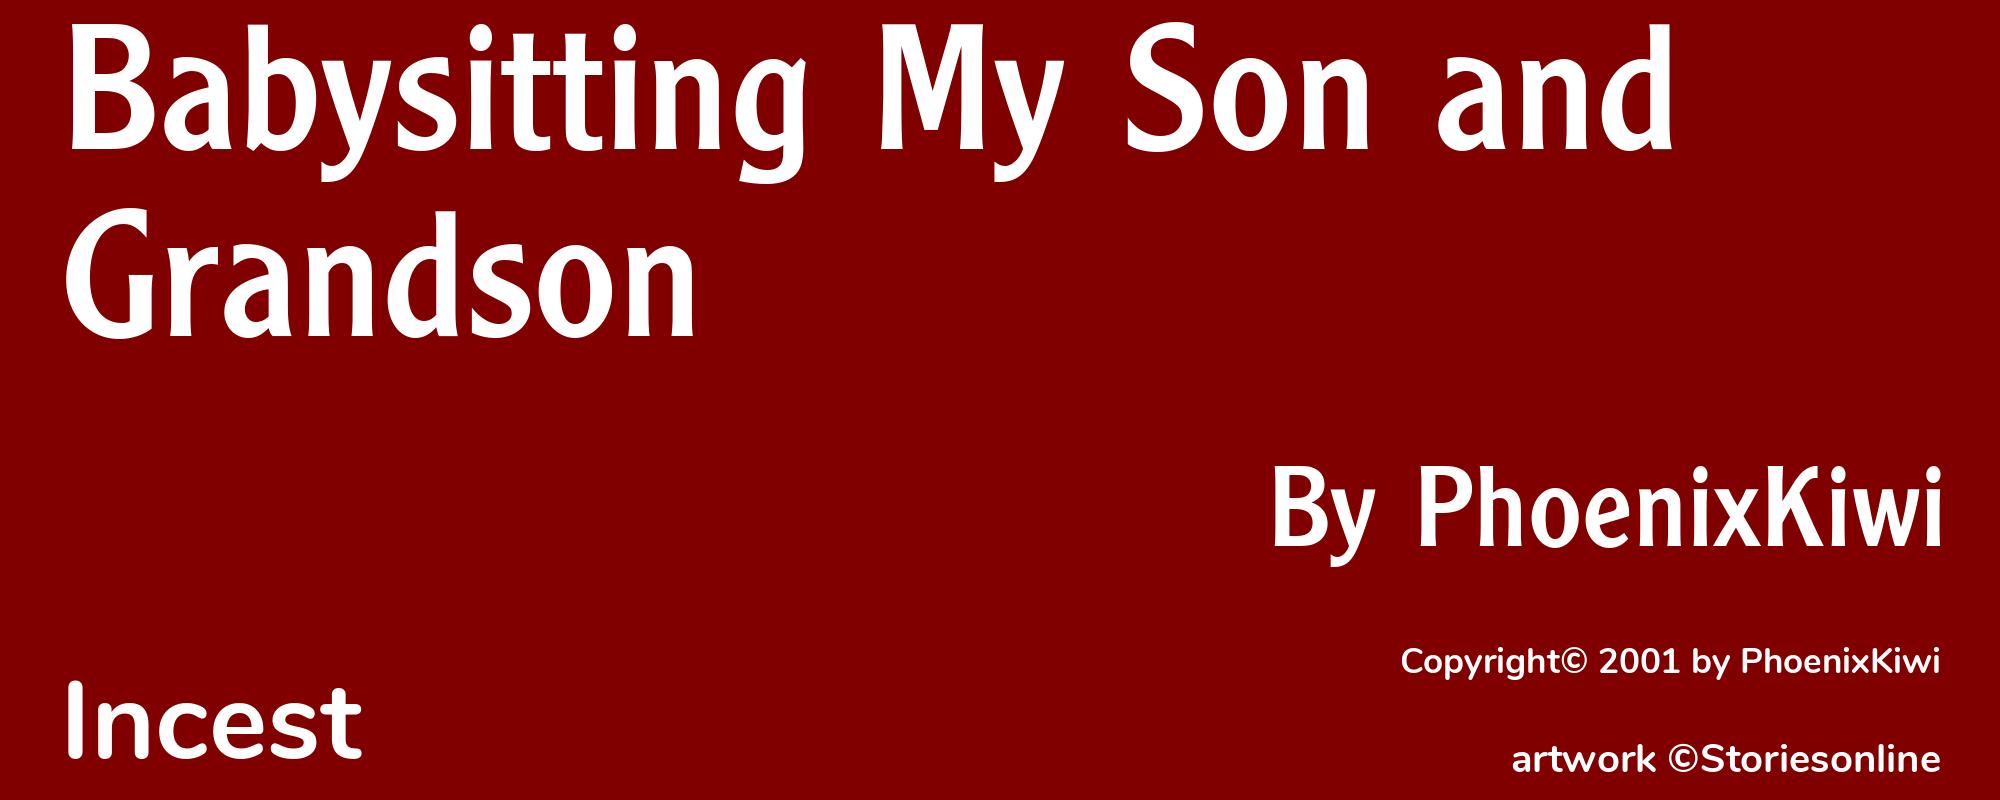 Babysitting My Son and Grandson - Cover